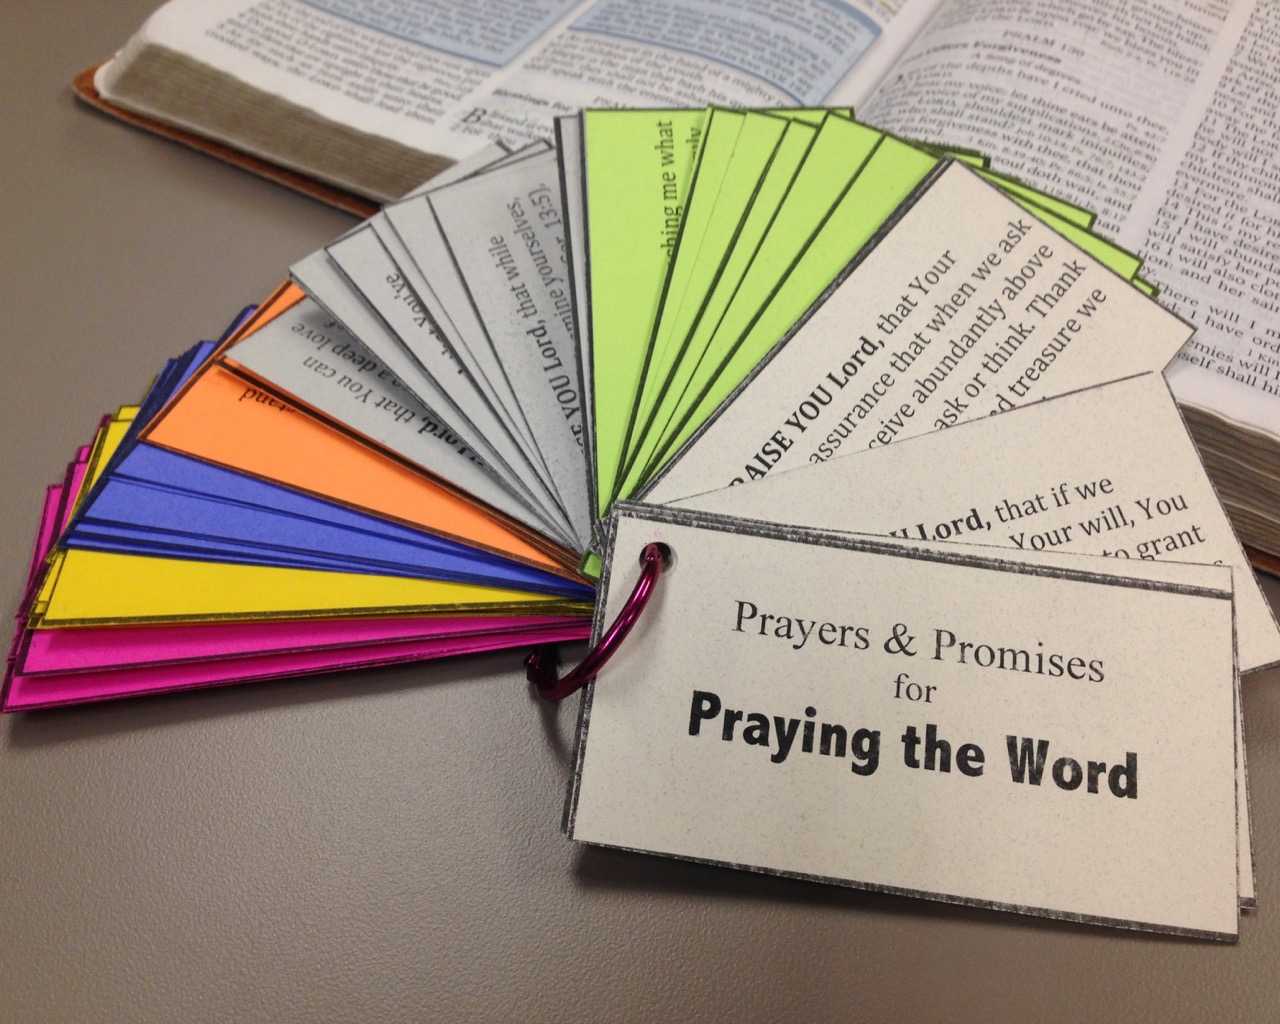 Praying The Word: Prayer & Promise Cards | Revival & Reformation Intended For Prayer Card Template For Word